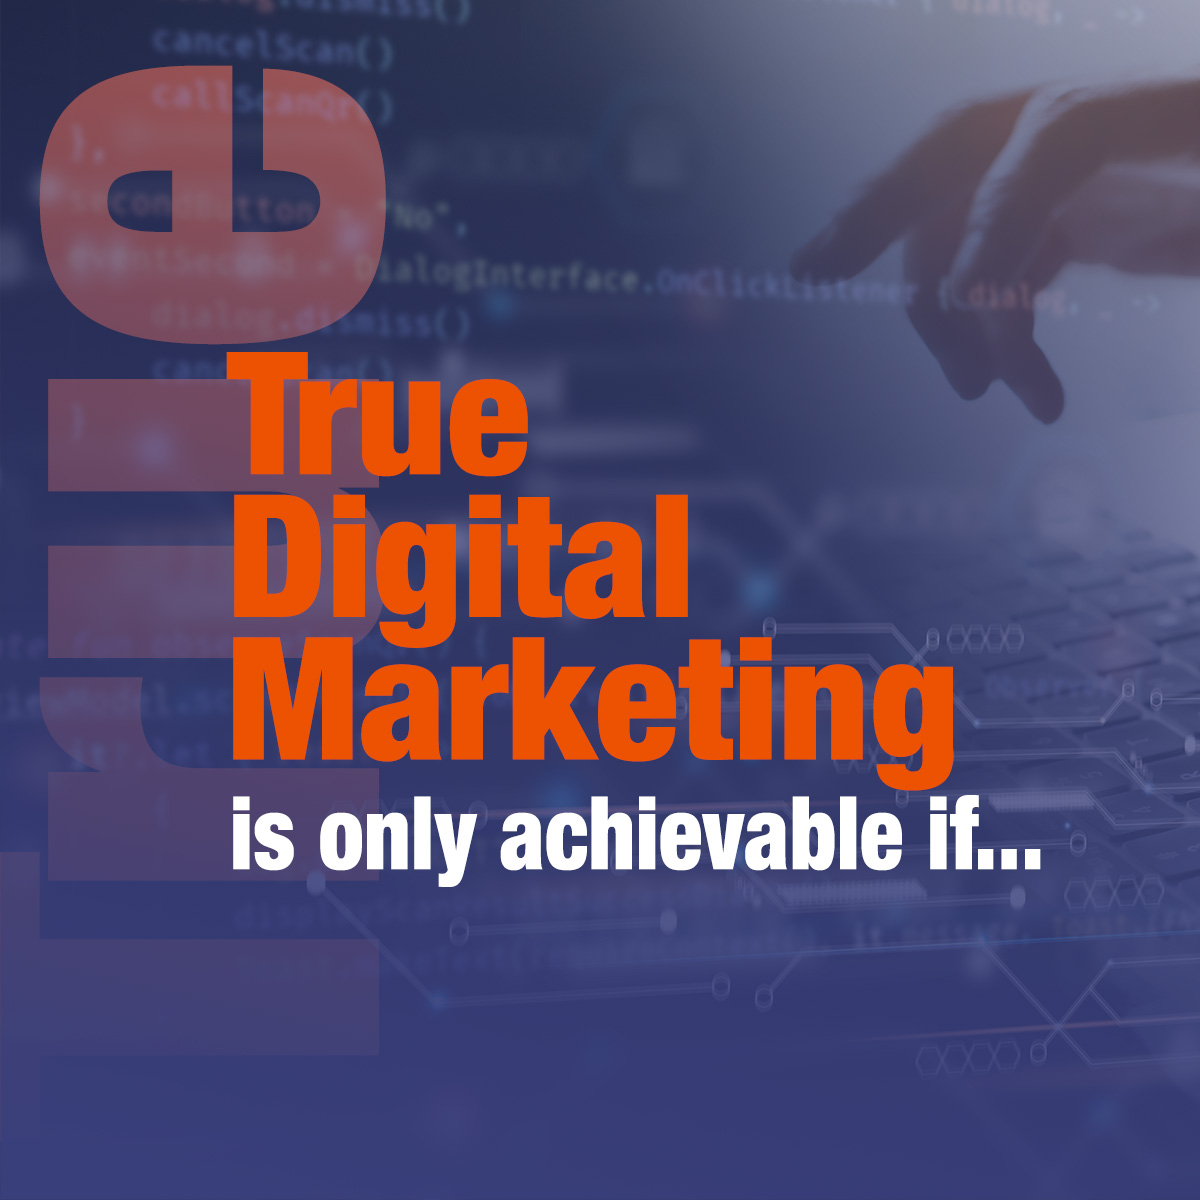 CAROUSEL: True Digital Marketing is only achievable if...